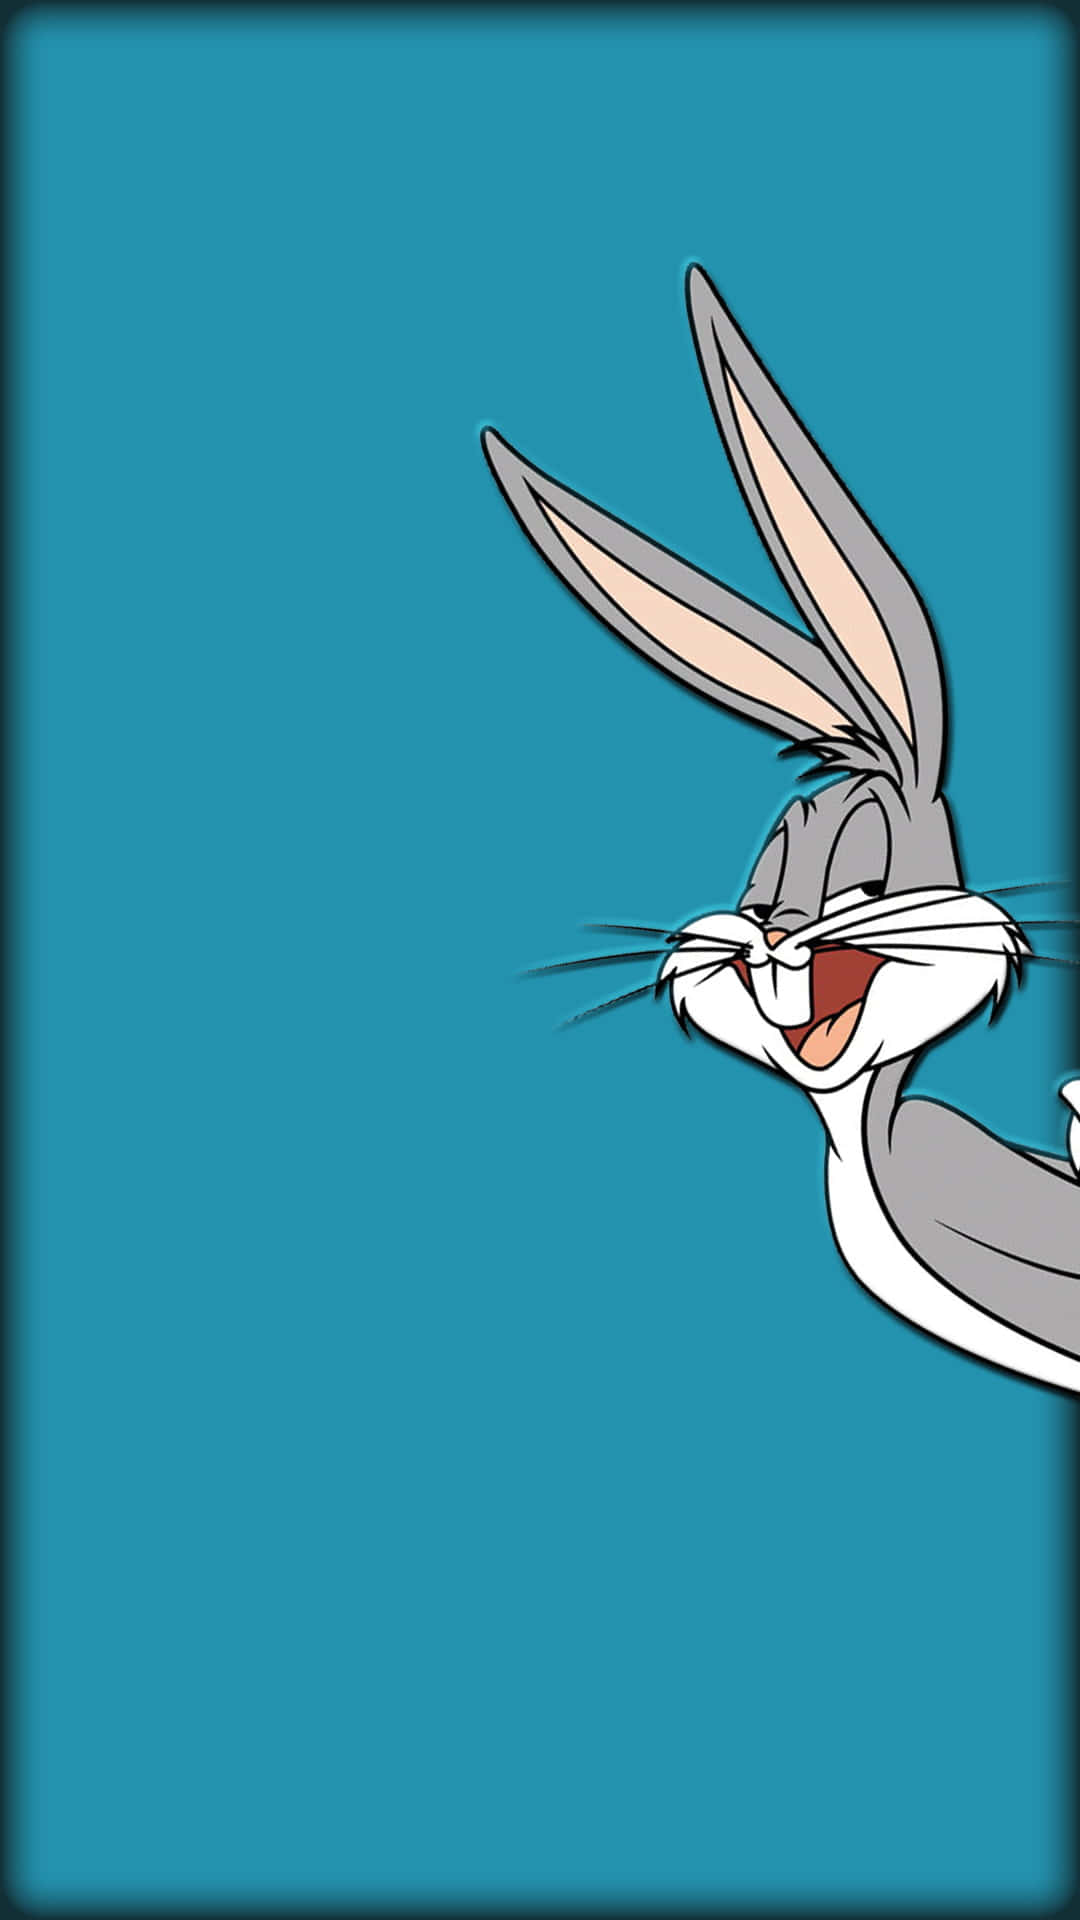 Bugs Bunny calls out from the background of an iPhone Wallpaper